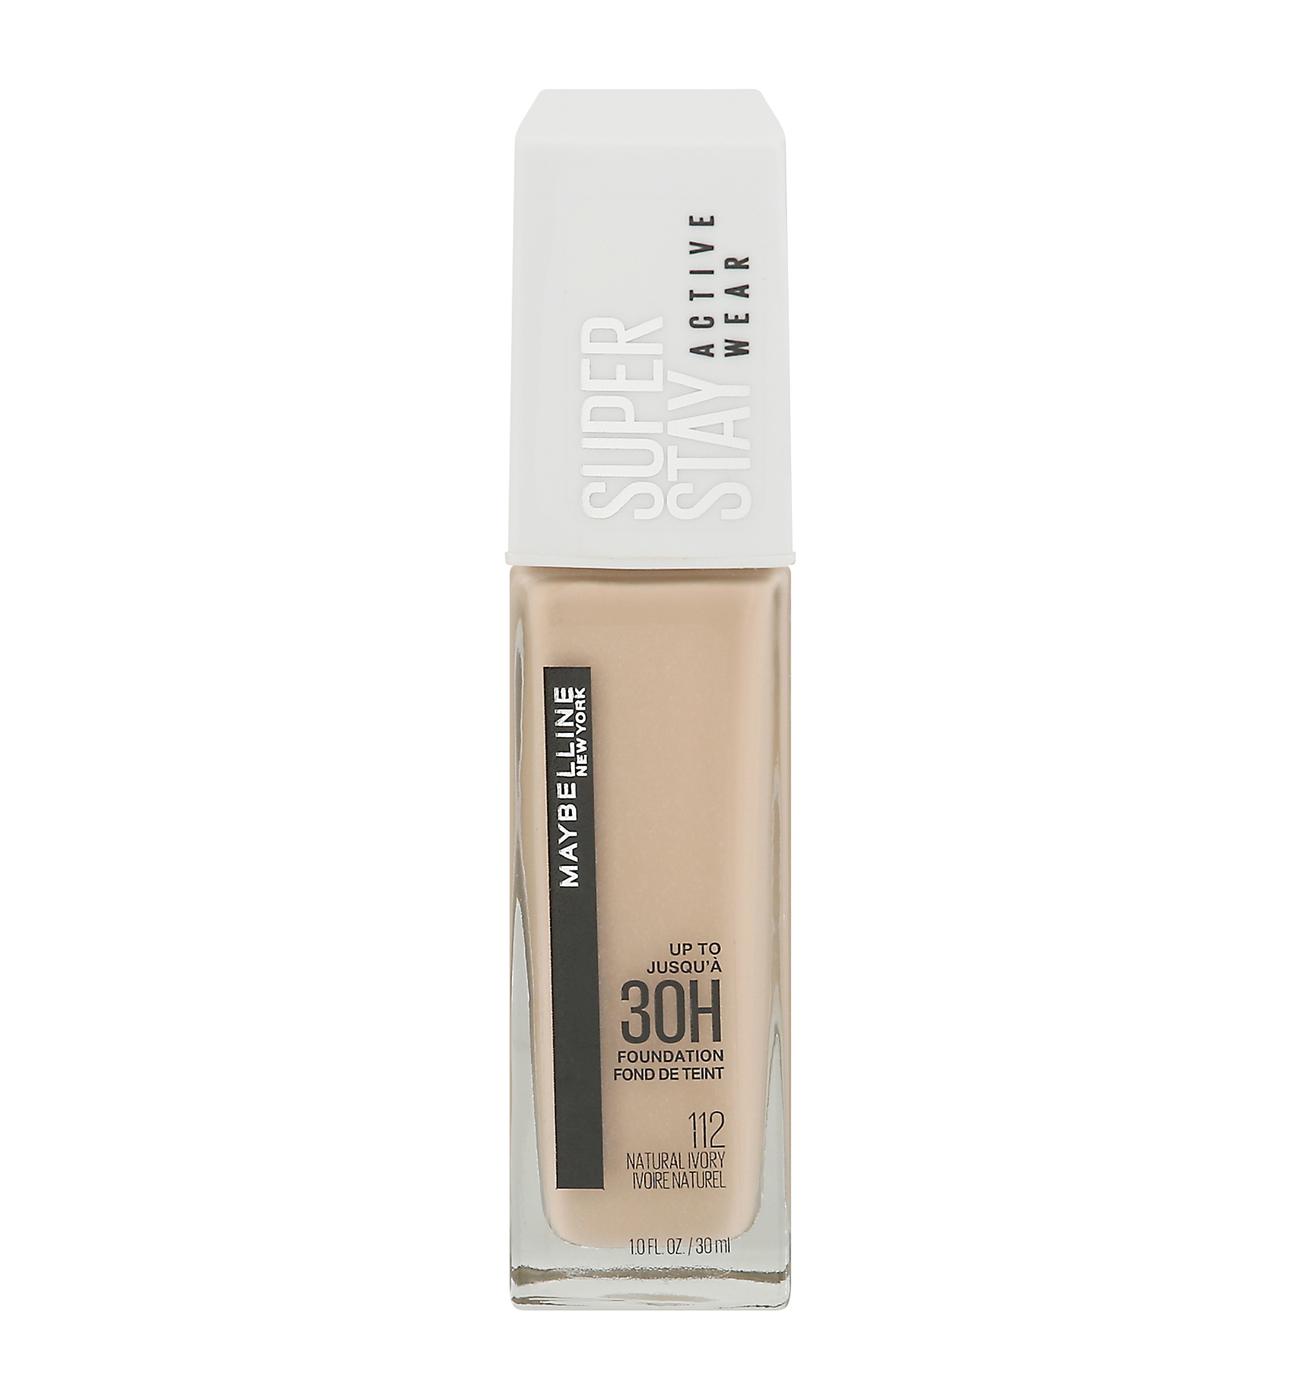 Natural Foundation Super - - Stay Shop H-E-B Longwear Maybelline Ivory Foundation Liquid at